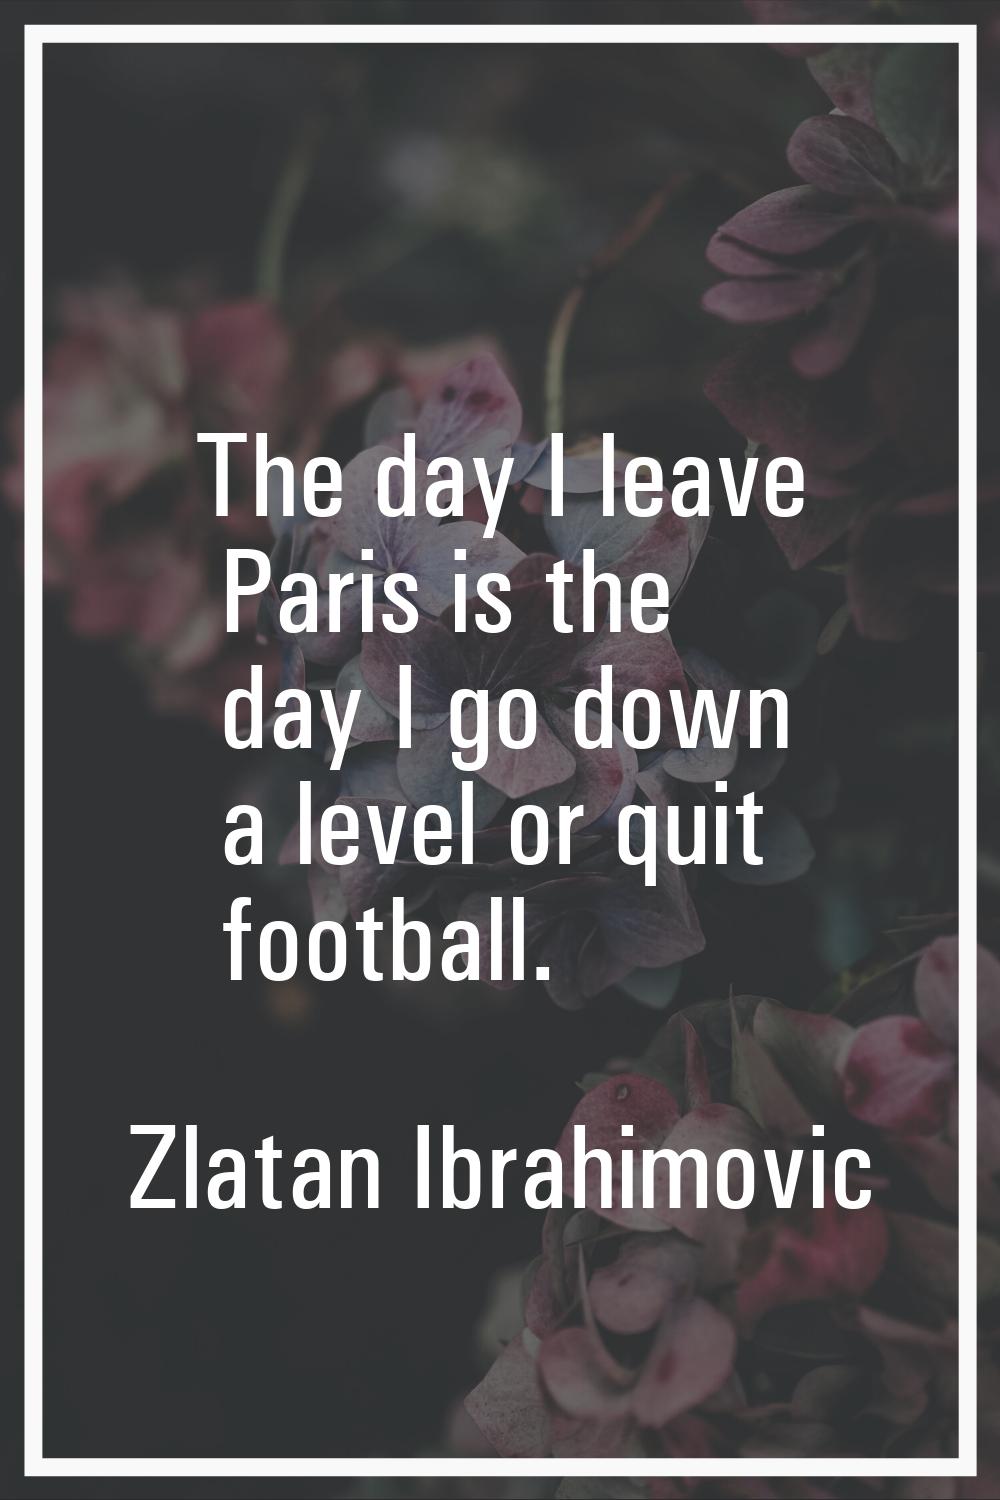 The day I leave Paris is the day I go down a level or quit football.